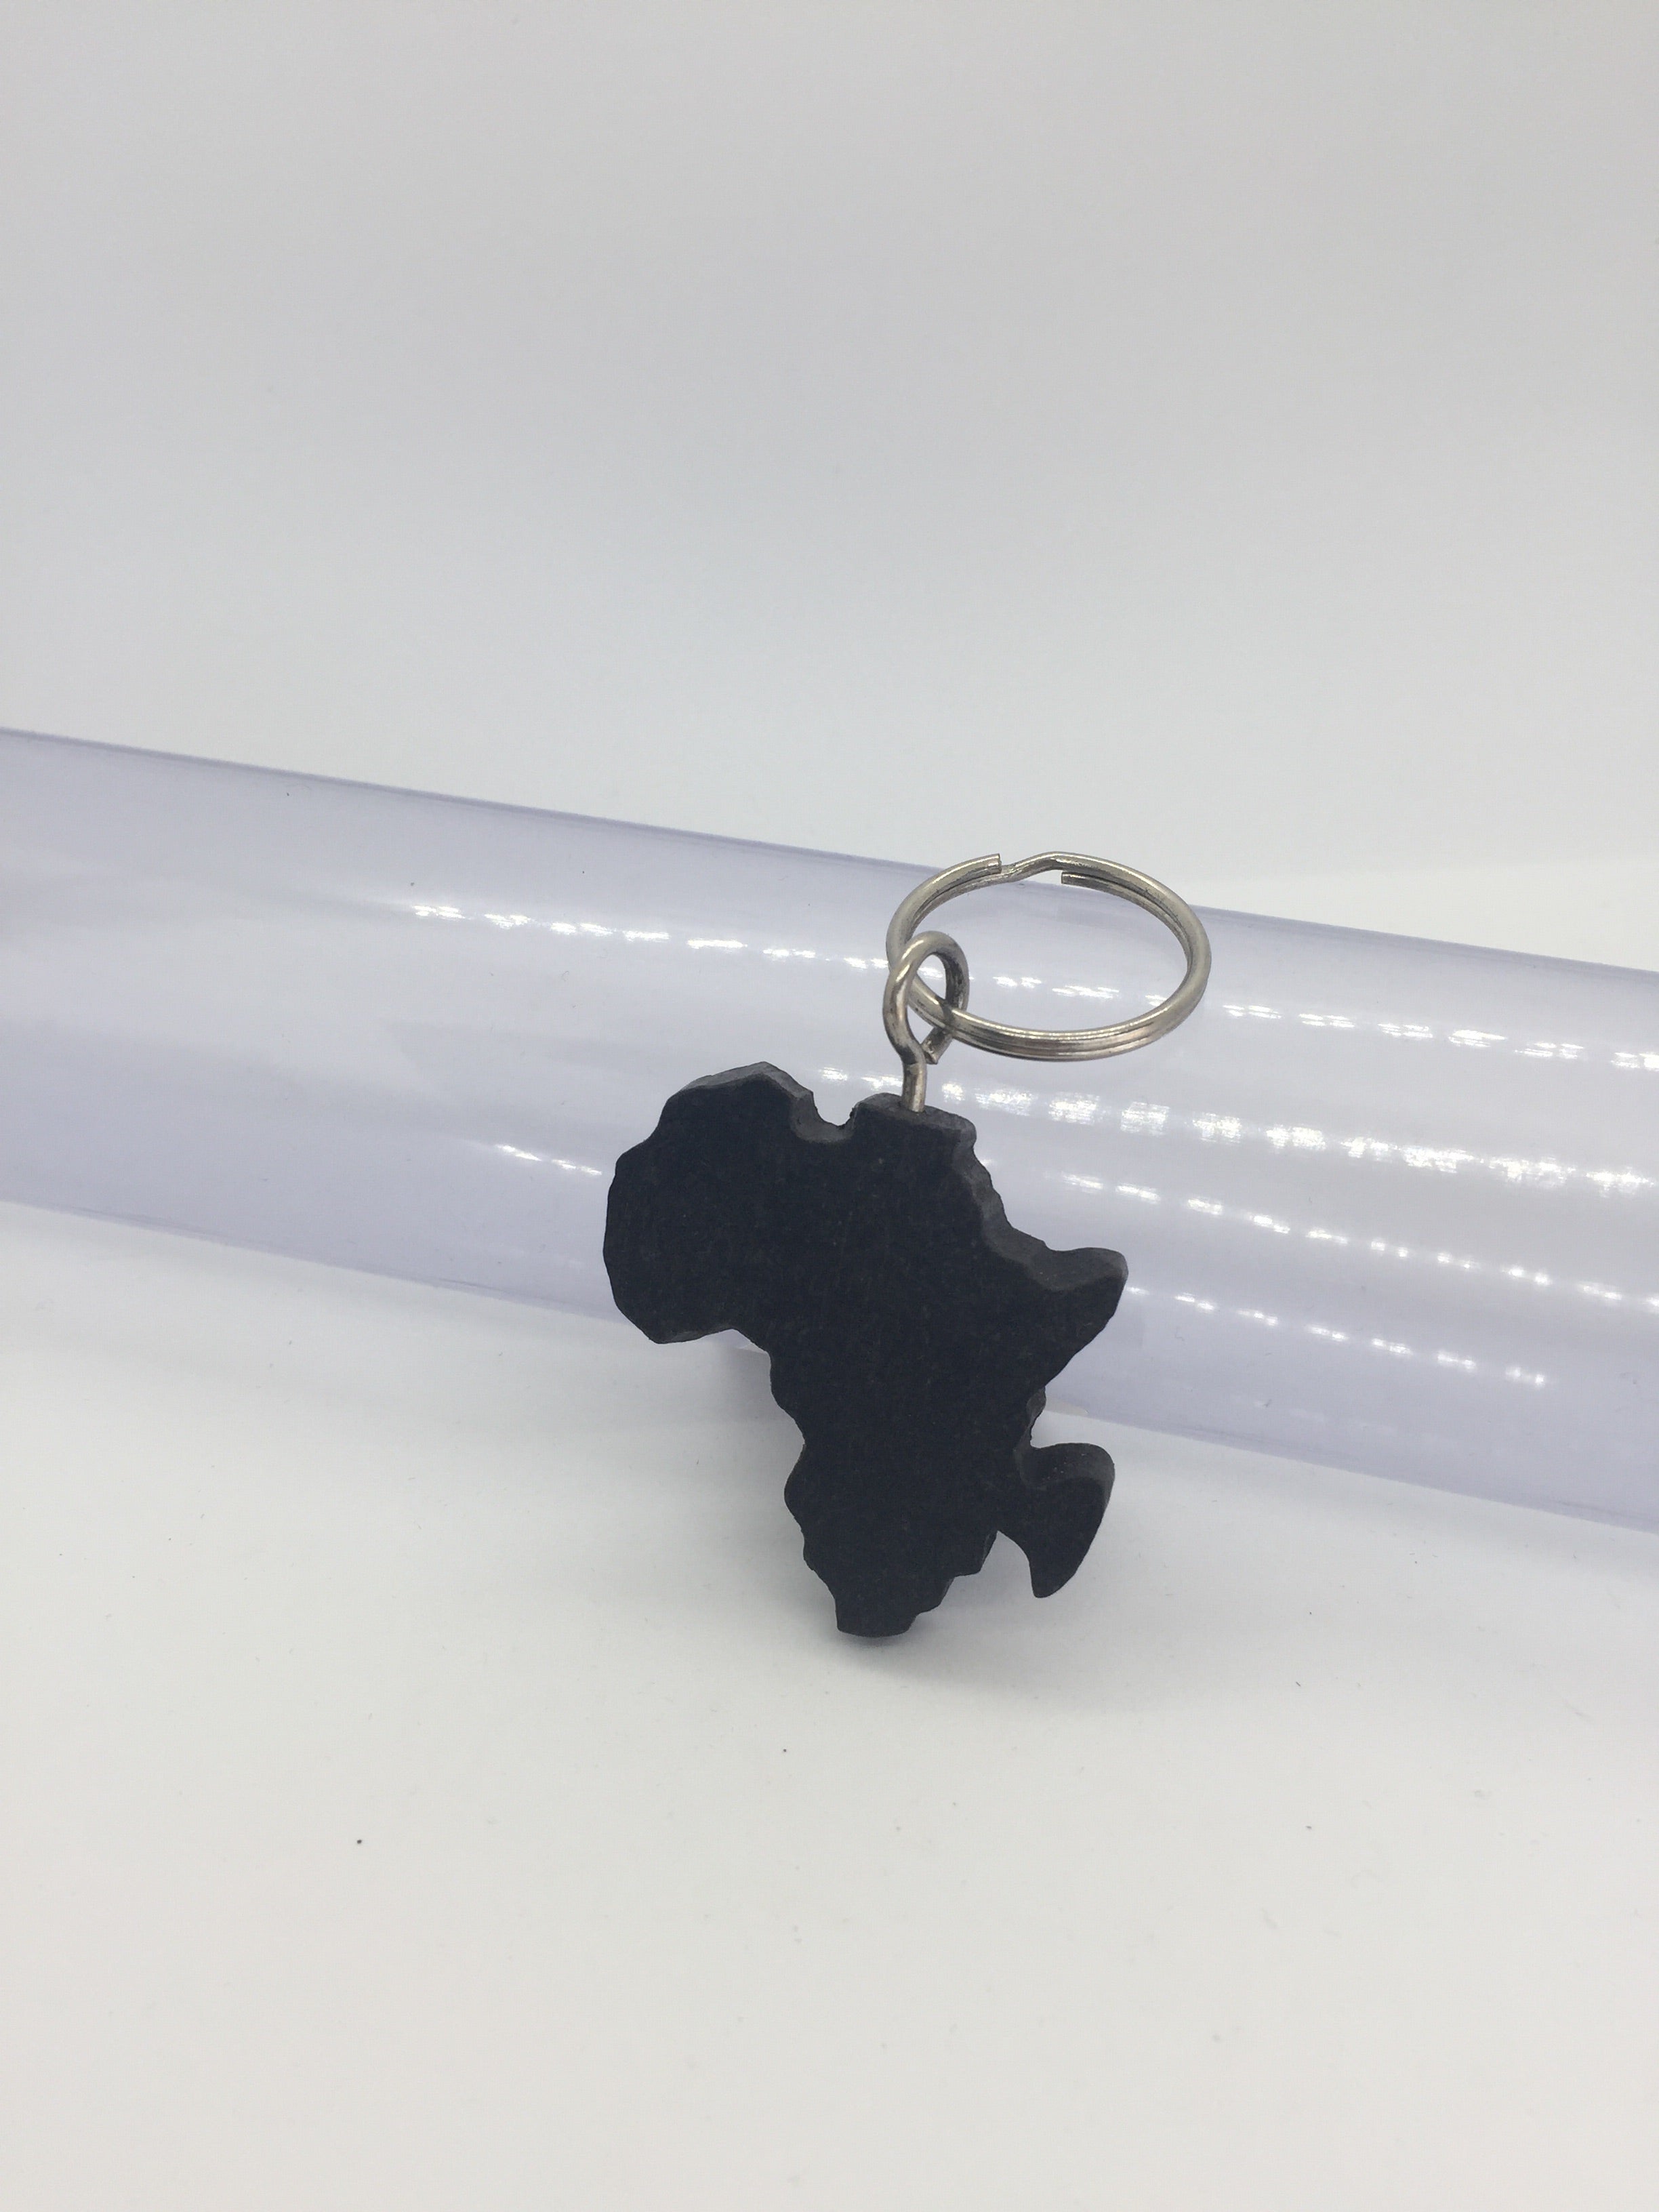 Wooded africa keychain